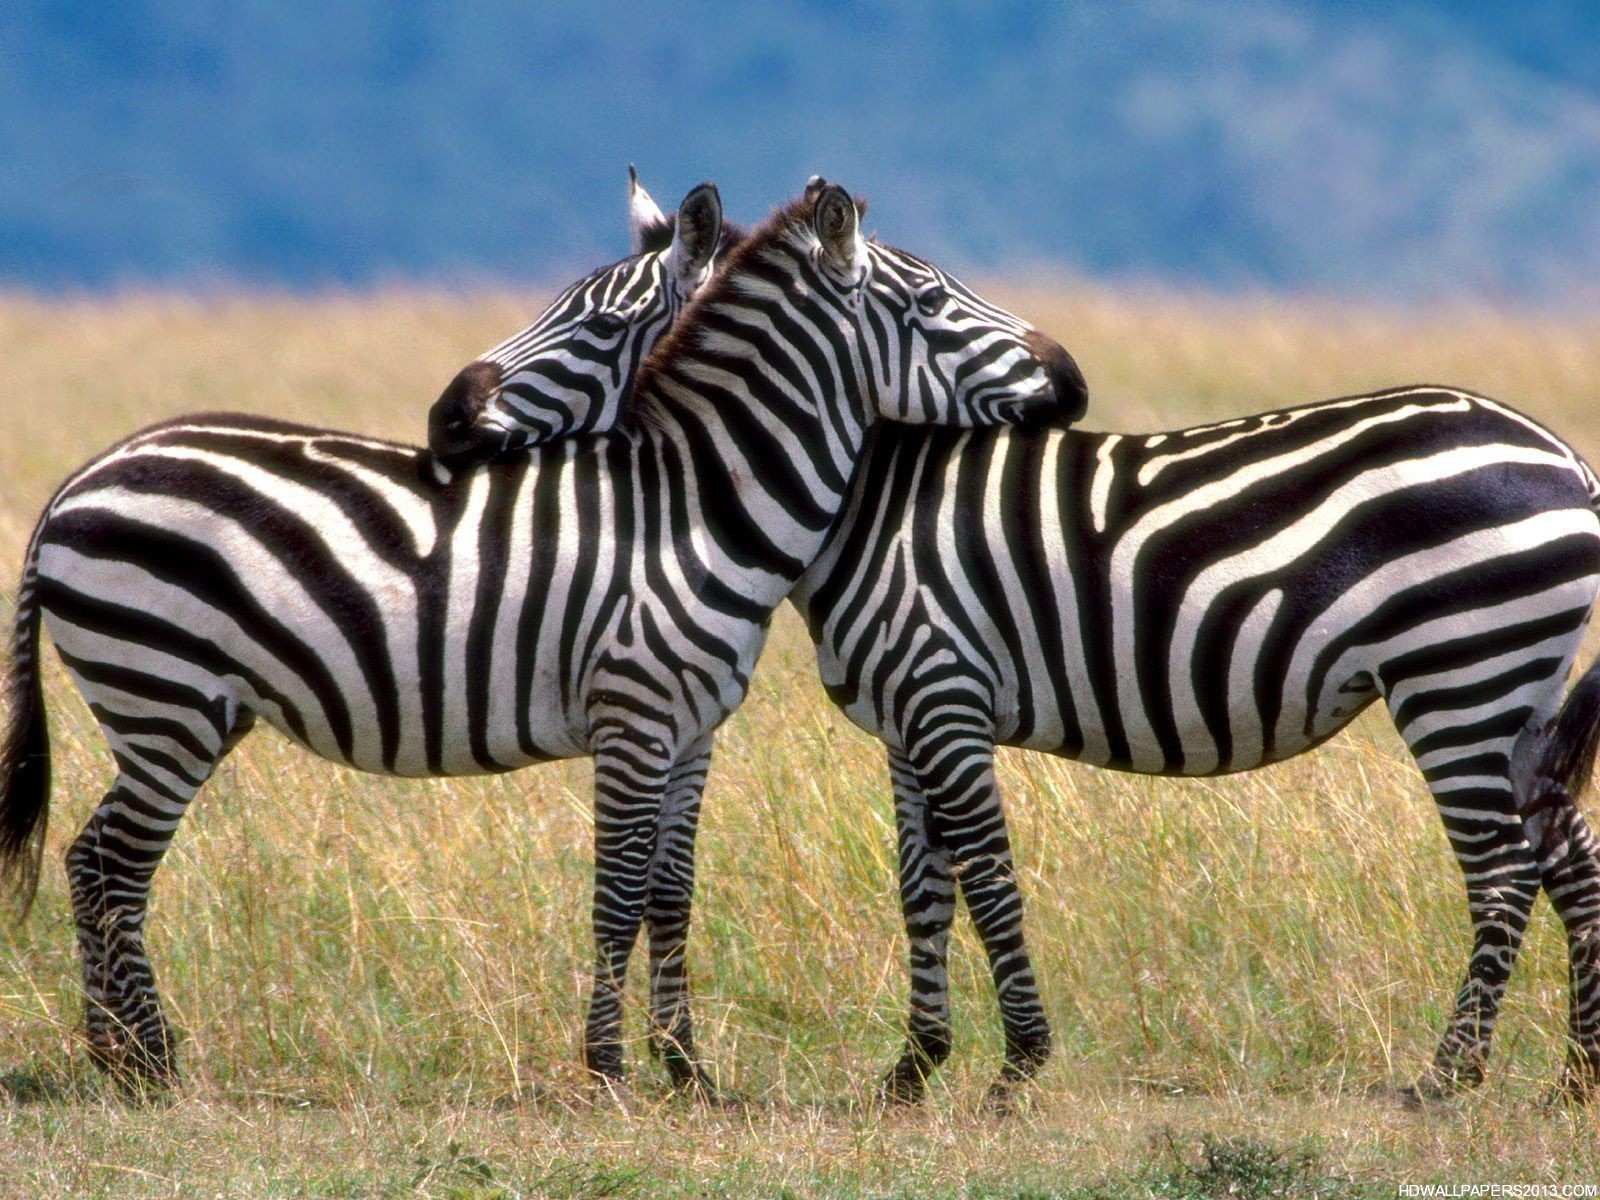 HD Zebra Wallpapers | High Definition Wallpapers, High Definition ...